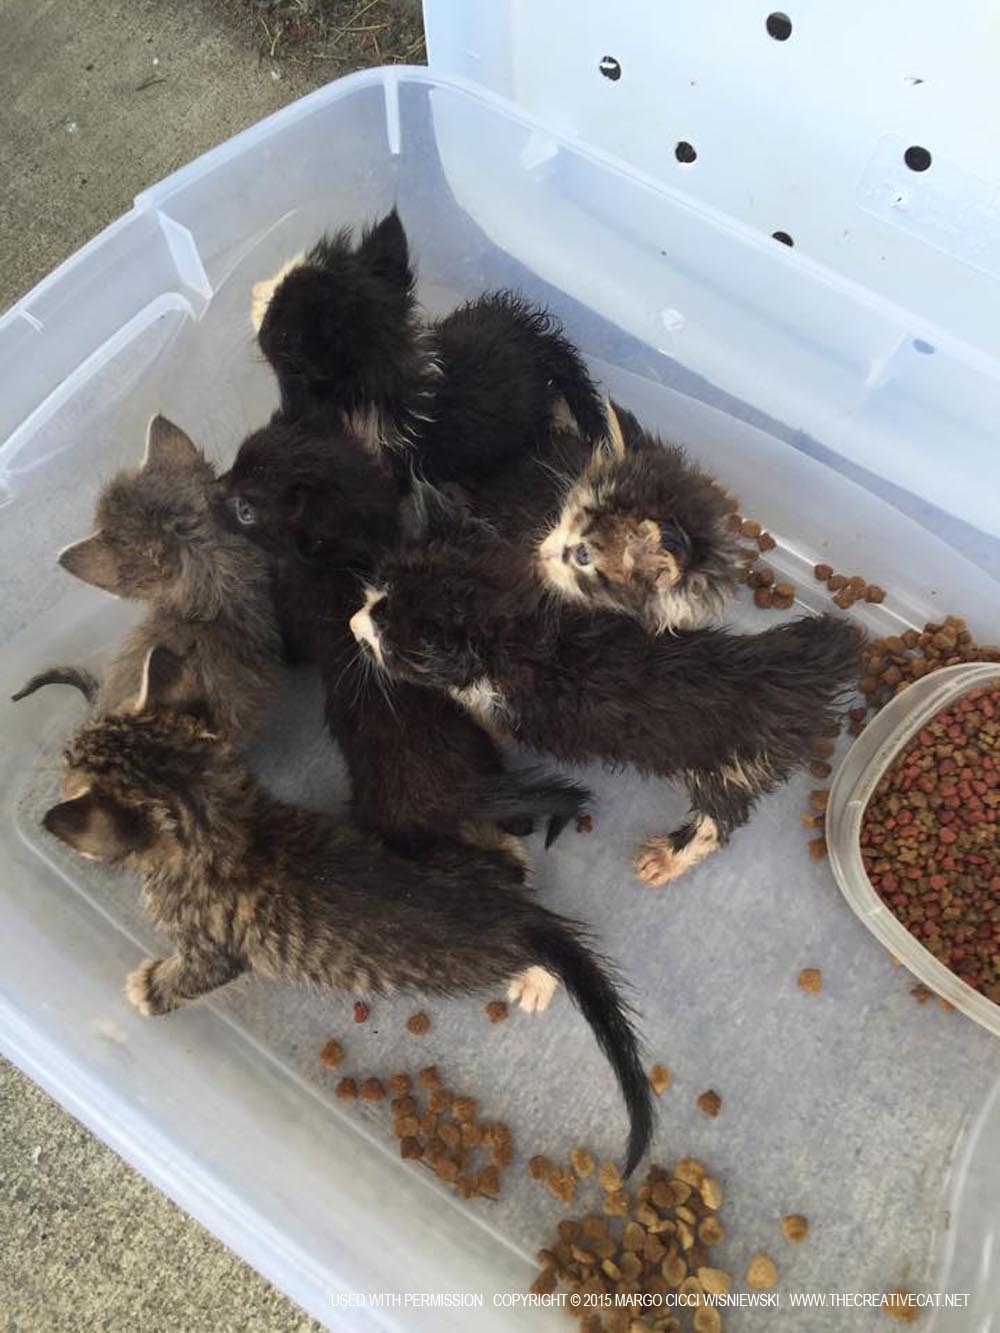 Kittens rescued from the hoarding situation.